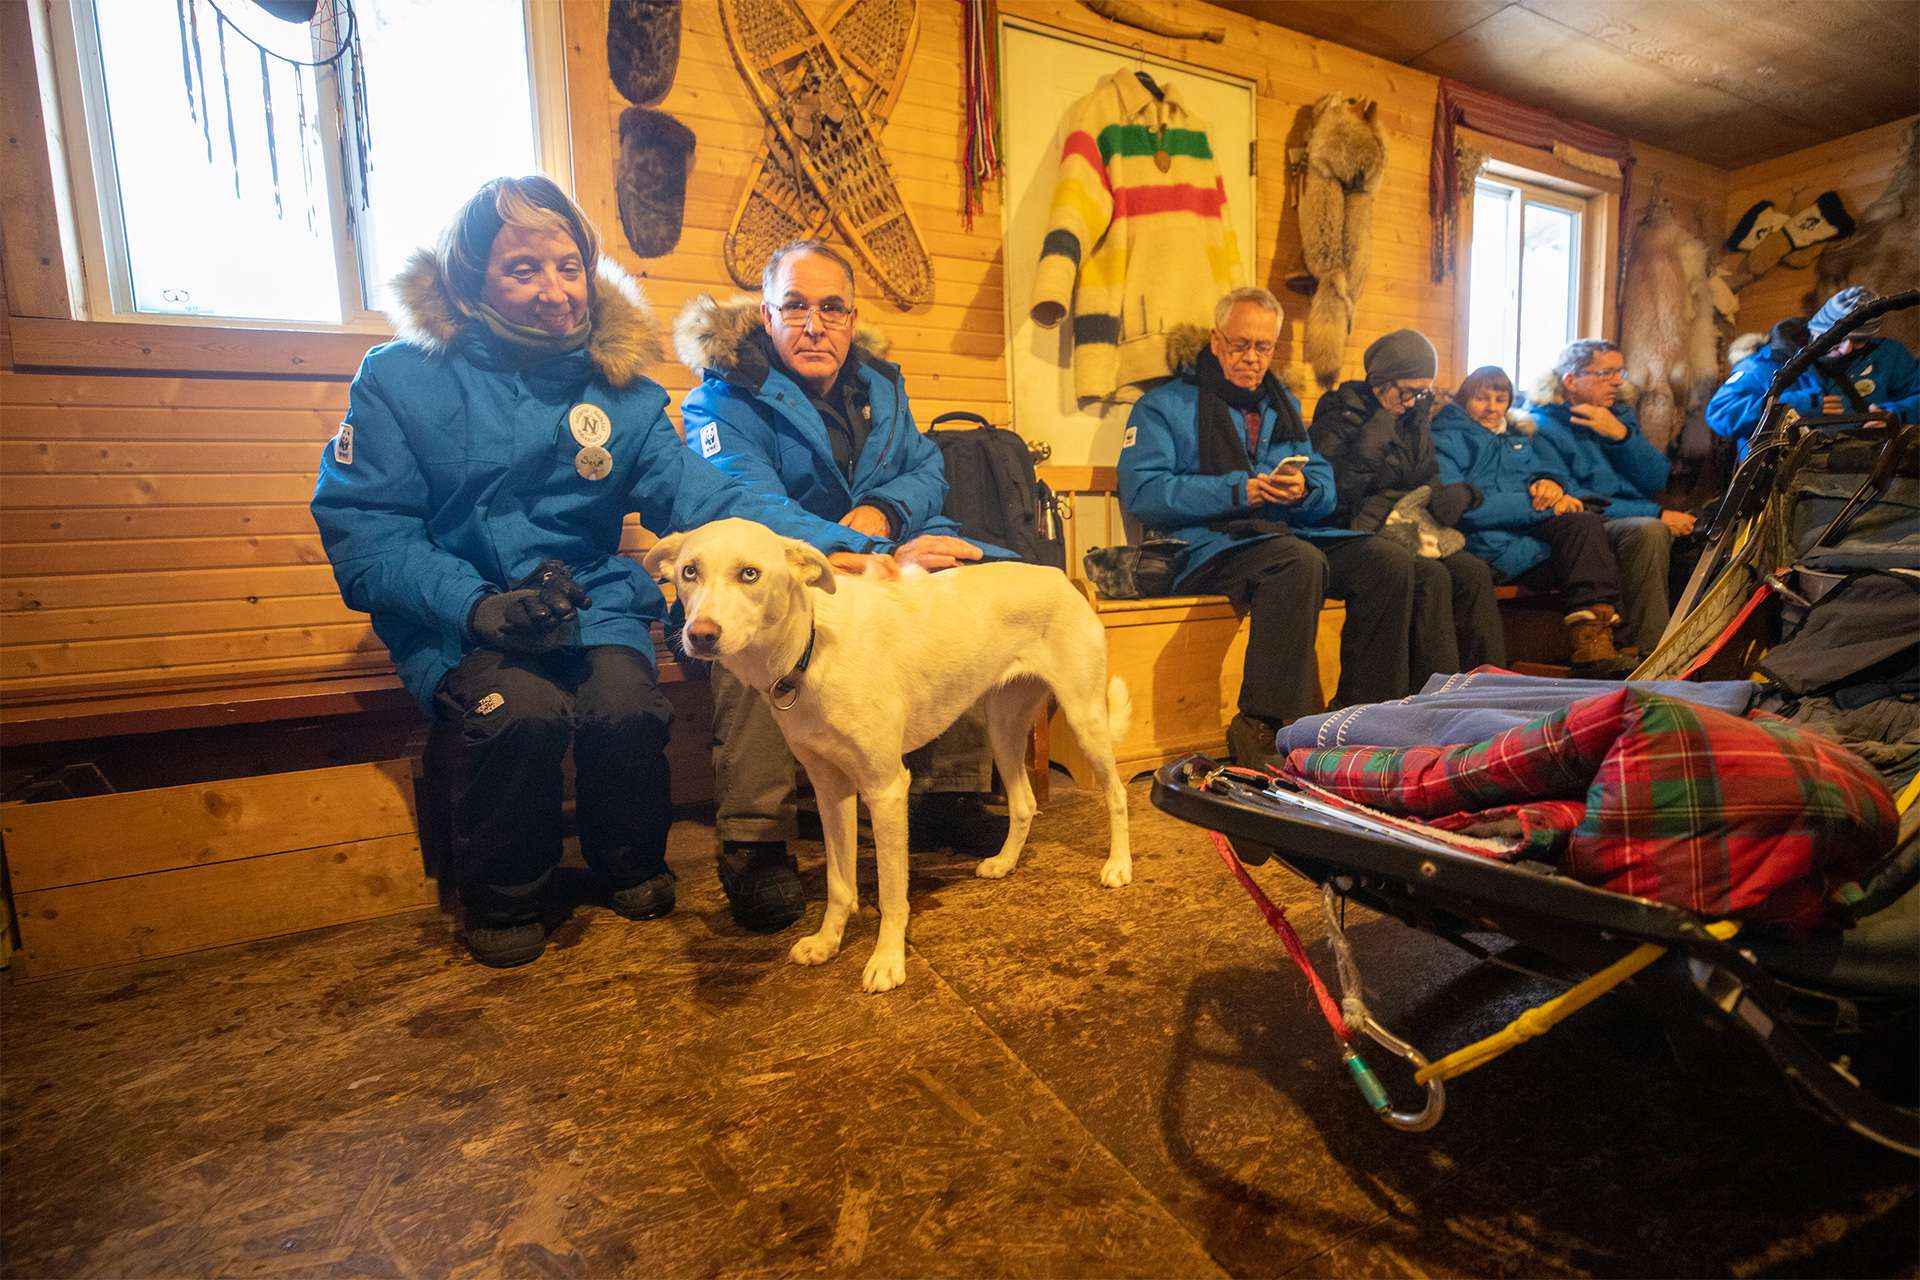 Two Nat Hab travelers smiling and petting a sled dog inside their shelter